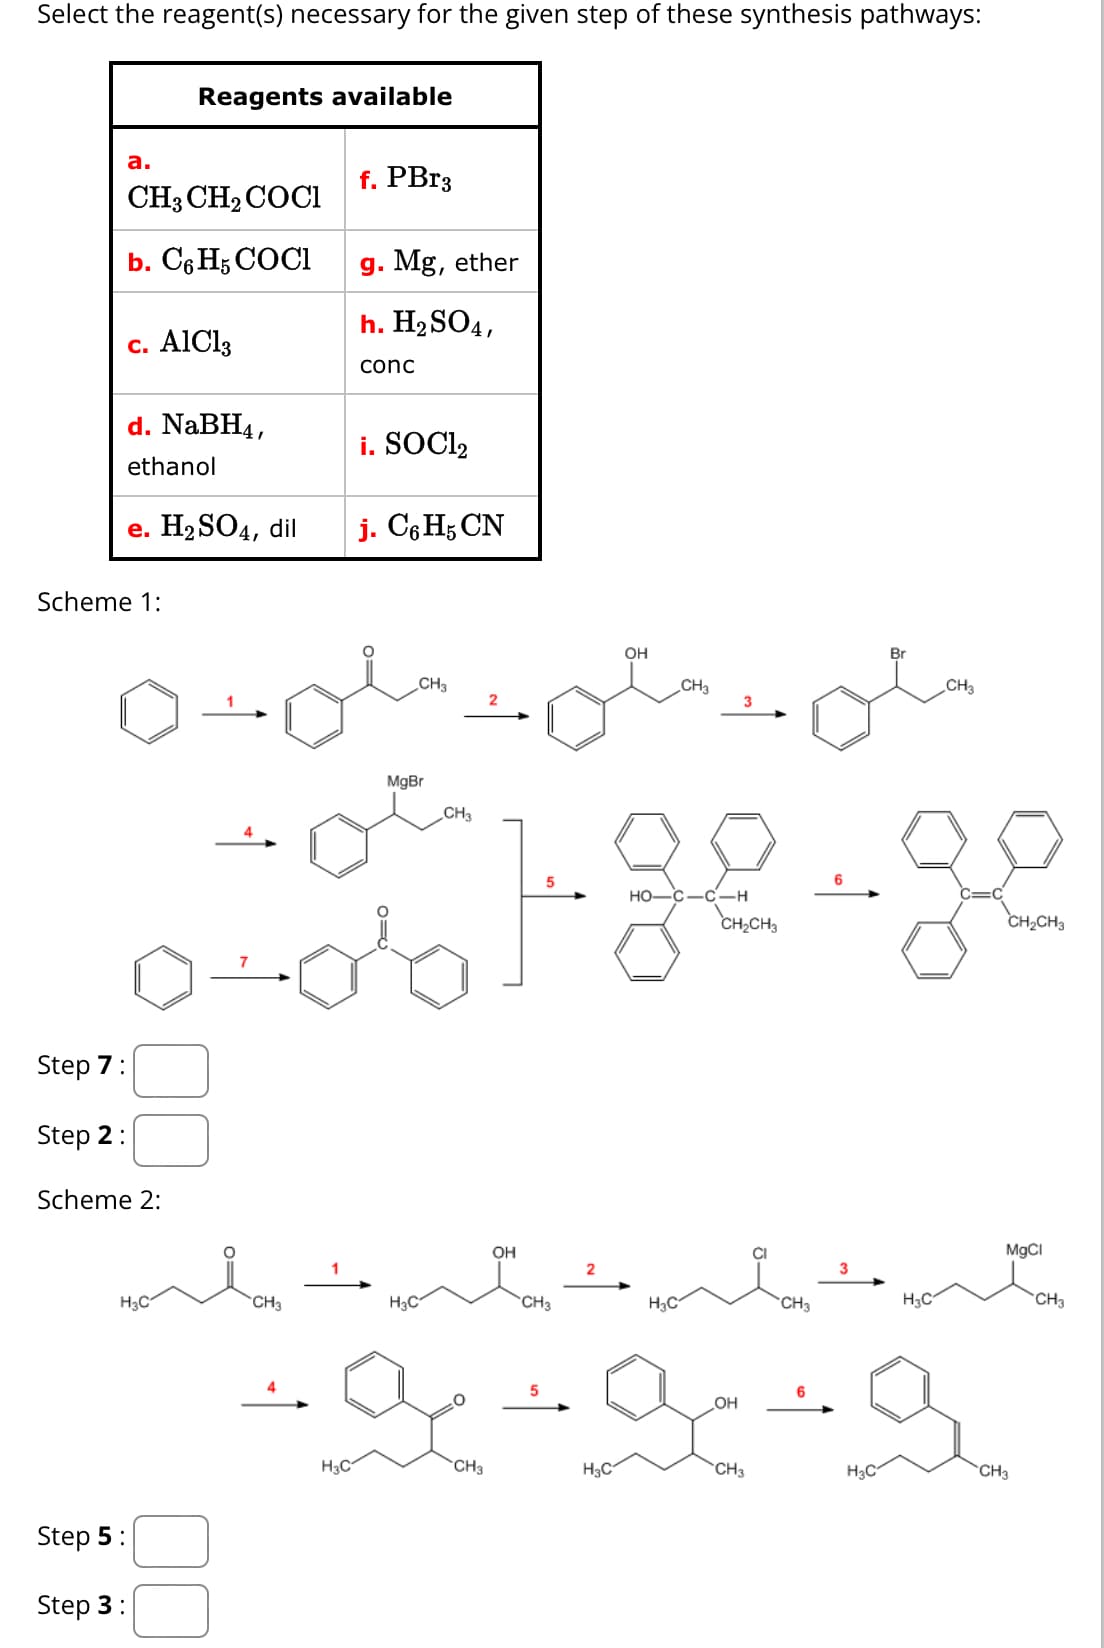 Select the reagent(s) necessary for the given step of these synthesis pathways:
Reagents available
a.
f. PBr3
CH3CH2COCI
b. C6H5 COCI
c. AlCl3
g. Mg, ether
h. H2SO4,
conc
d. NaBH4,
ethanol
i. SOCI₂
e. H2SO4, dil
j. C6H5 CN
Scheme 1:
Step 7:
Step 2:
Scheme 2:
MgBr
CH3
H3C
CH3
H3C
Step 5:
Step 3:
CH3
2
OH
OH
CH3
3
HO-C-C-H
Br
CH3
CH2CH3
CH2CH3
MgCl
3
2
H3C
CH3
CH3
H3C
CH3
5
6
.OH
H3C
CH3
H₂C CH₂
H3C
CH3